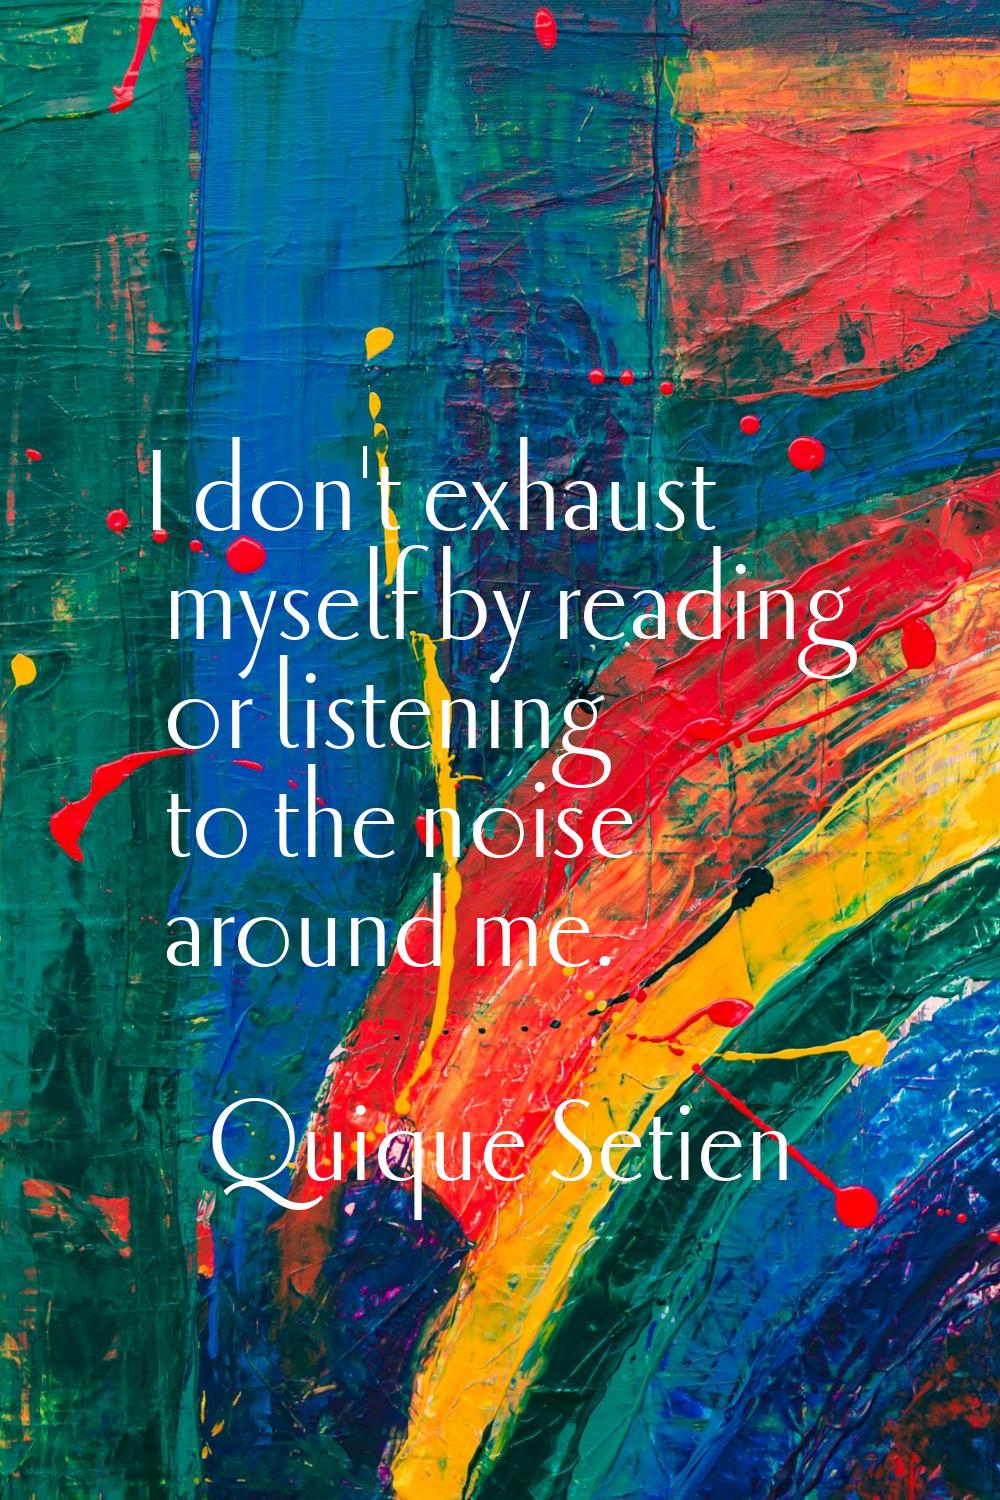 I don't exhaust myself by reading or listening to the noise around me.